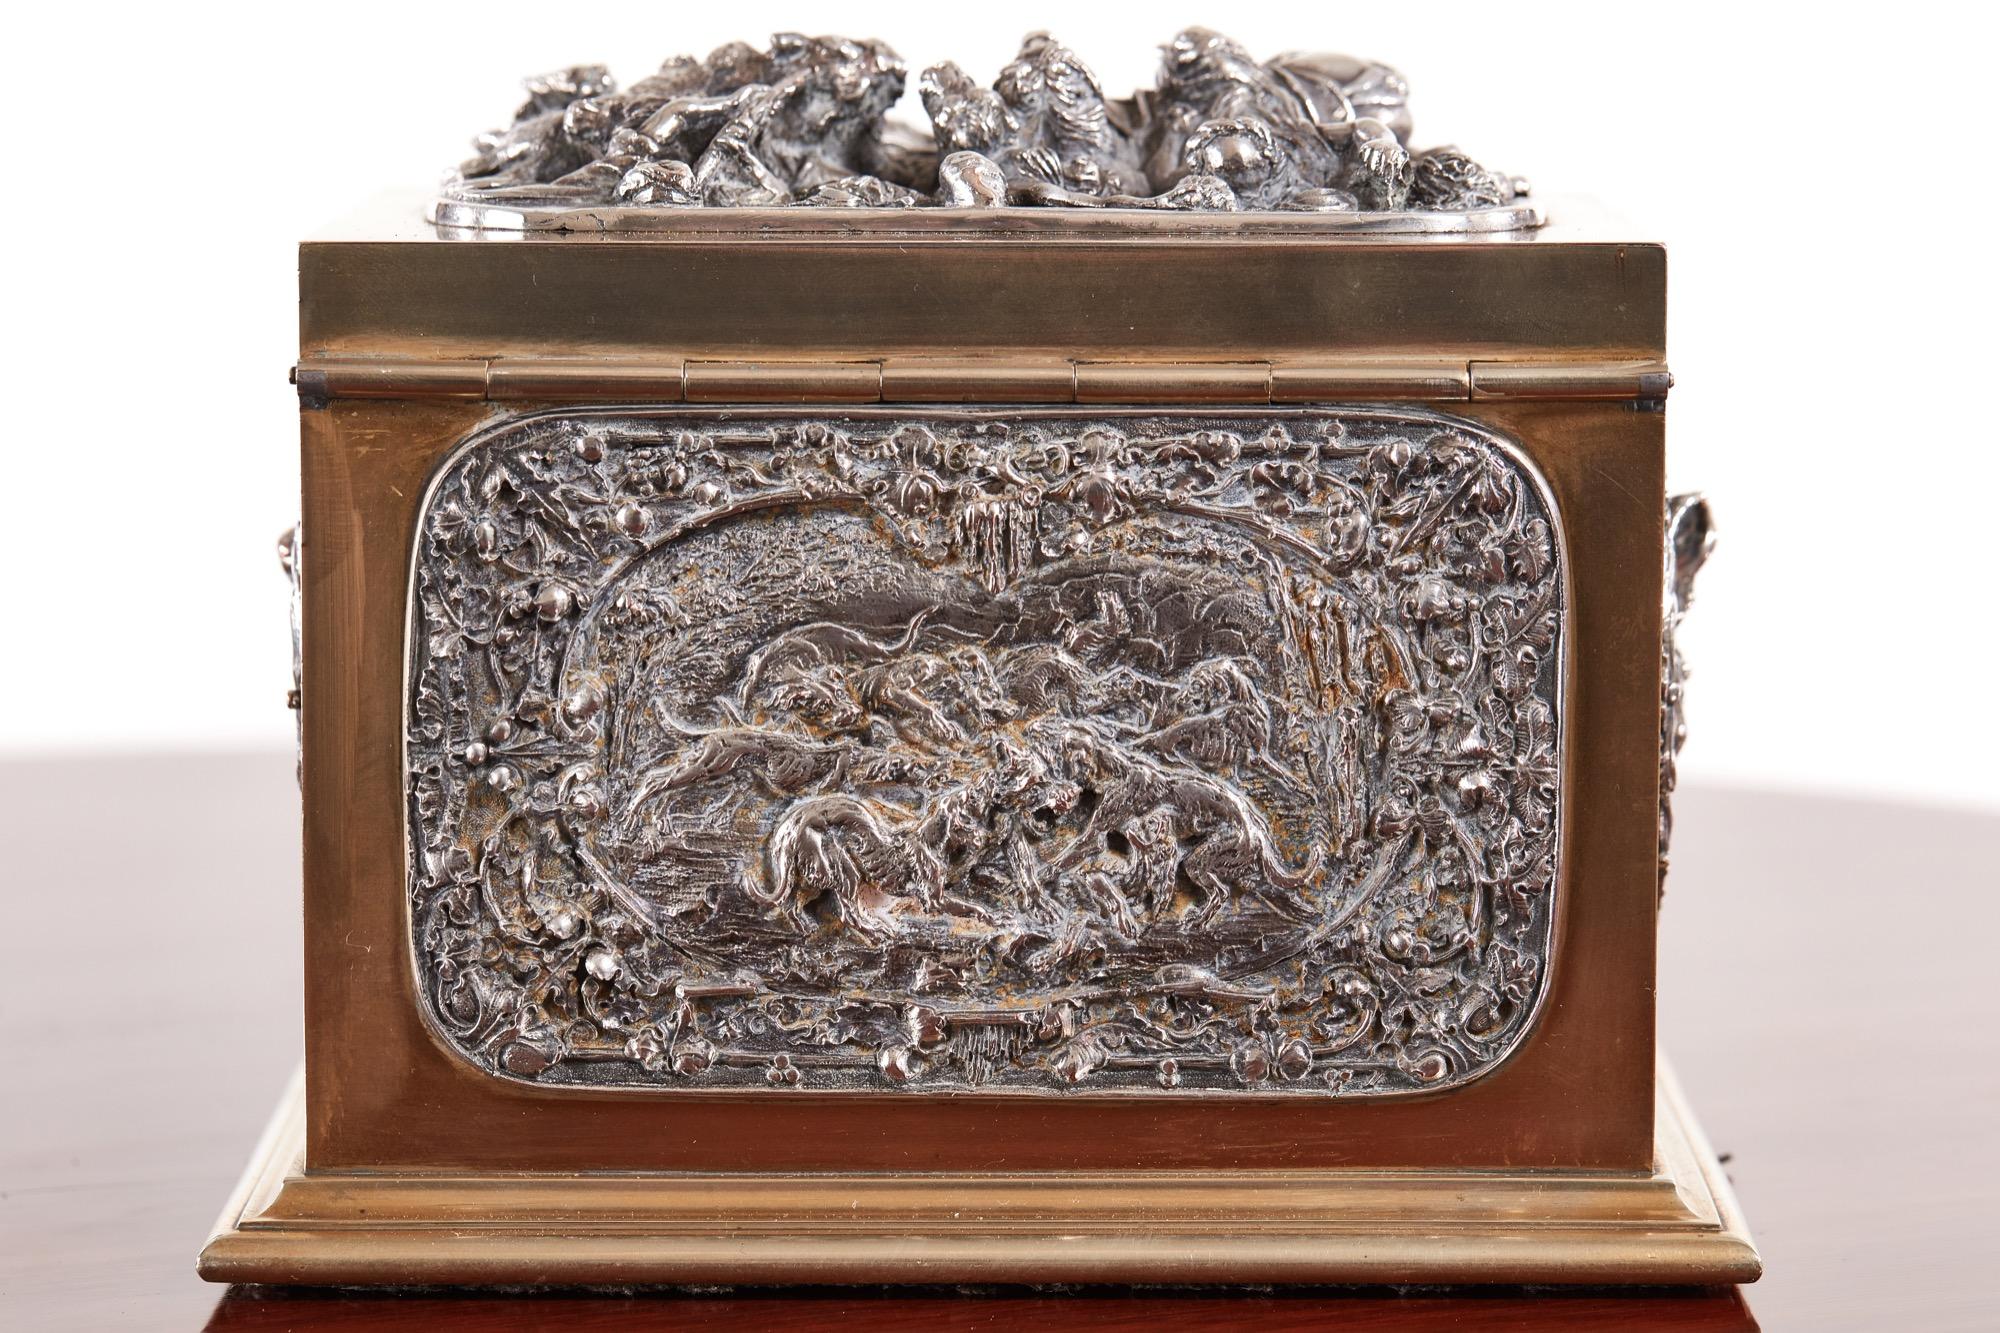 Fine antique Victorian brass and silver plated tea caddy with magnificent silver plated panels and stunning hunting scenes. It has silver plated end panels with delightful cherubs, inside are two beautifully engraved oval silver plated tea caddies.